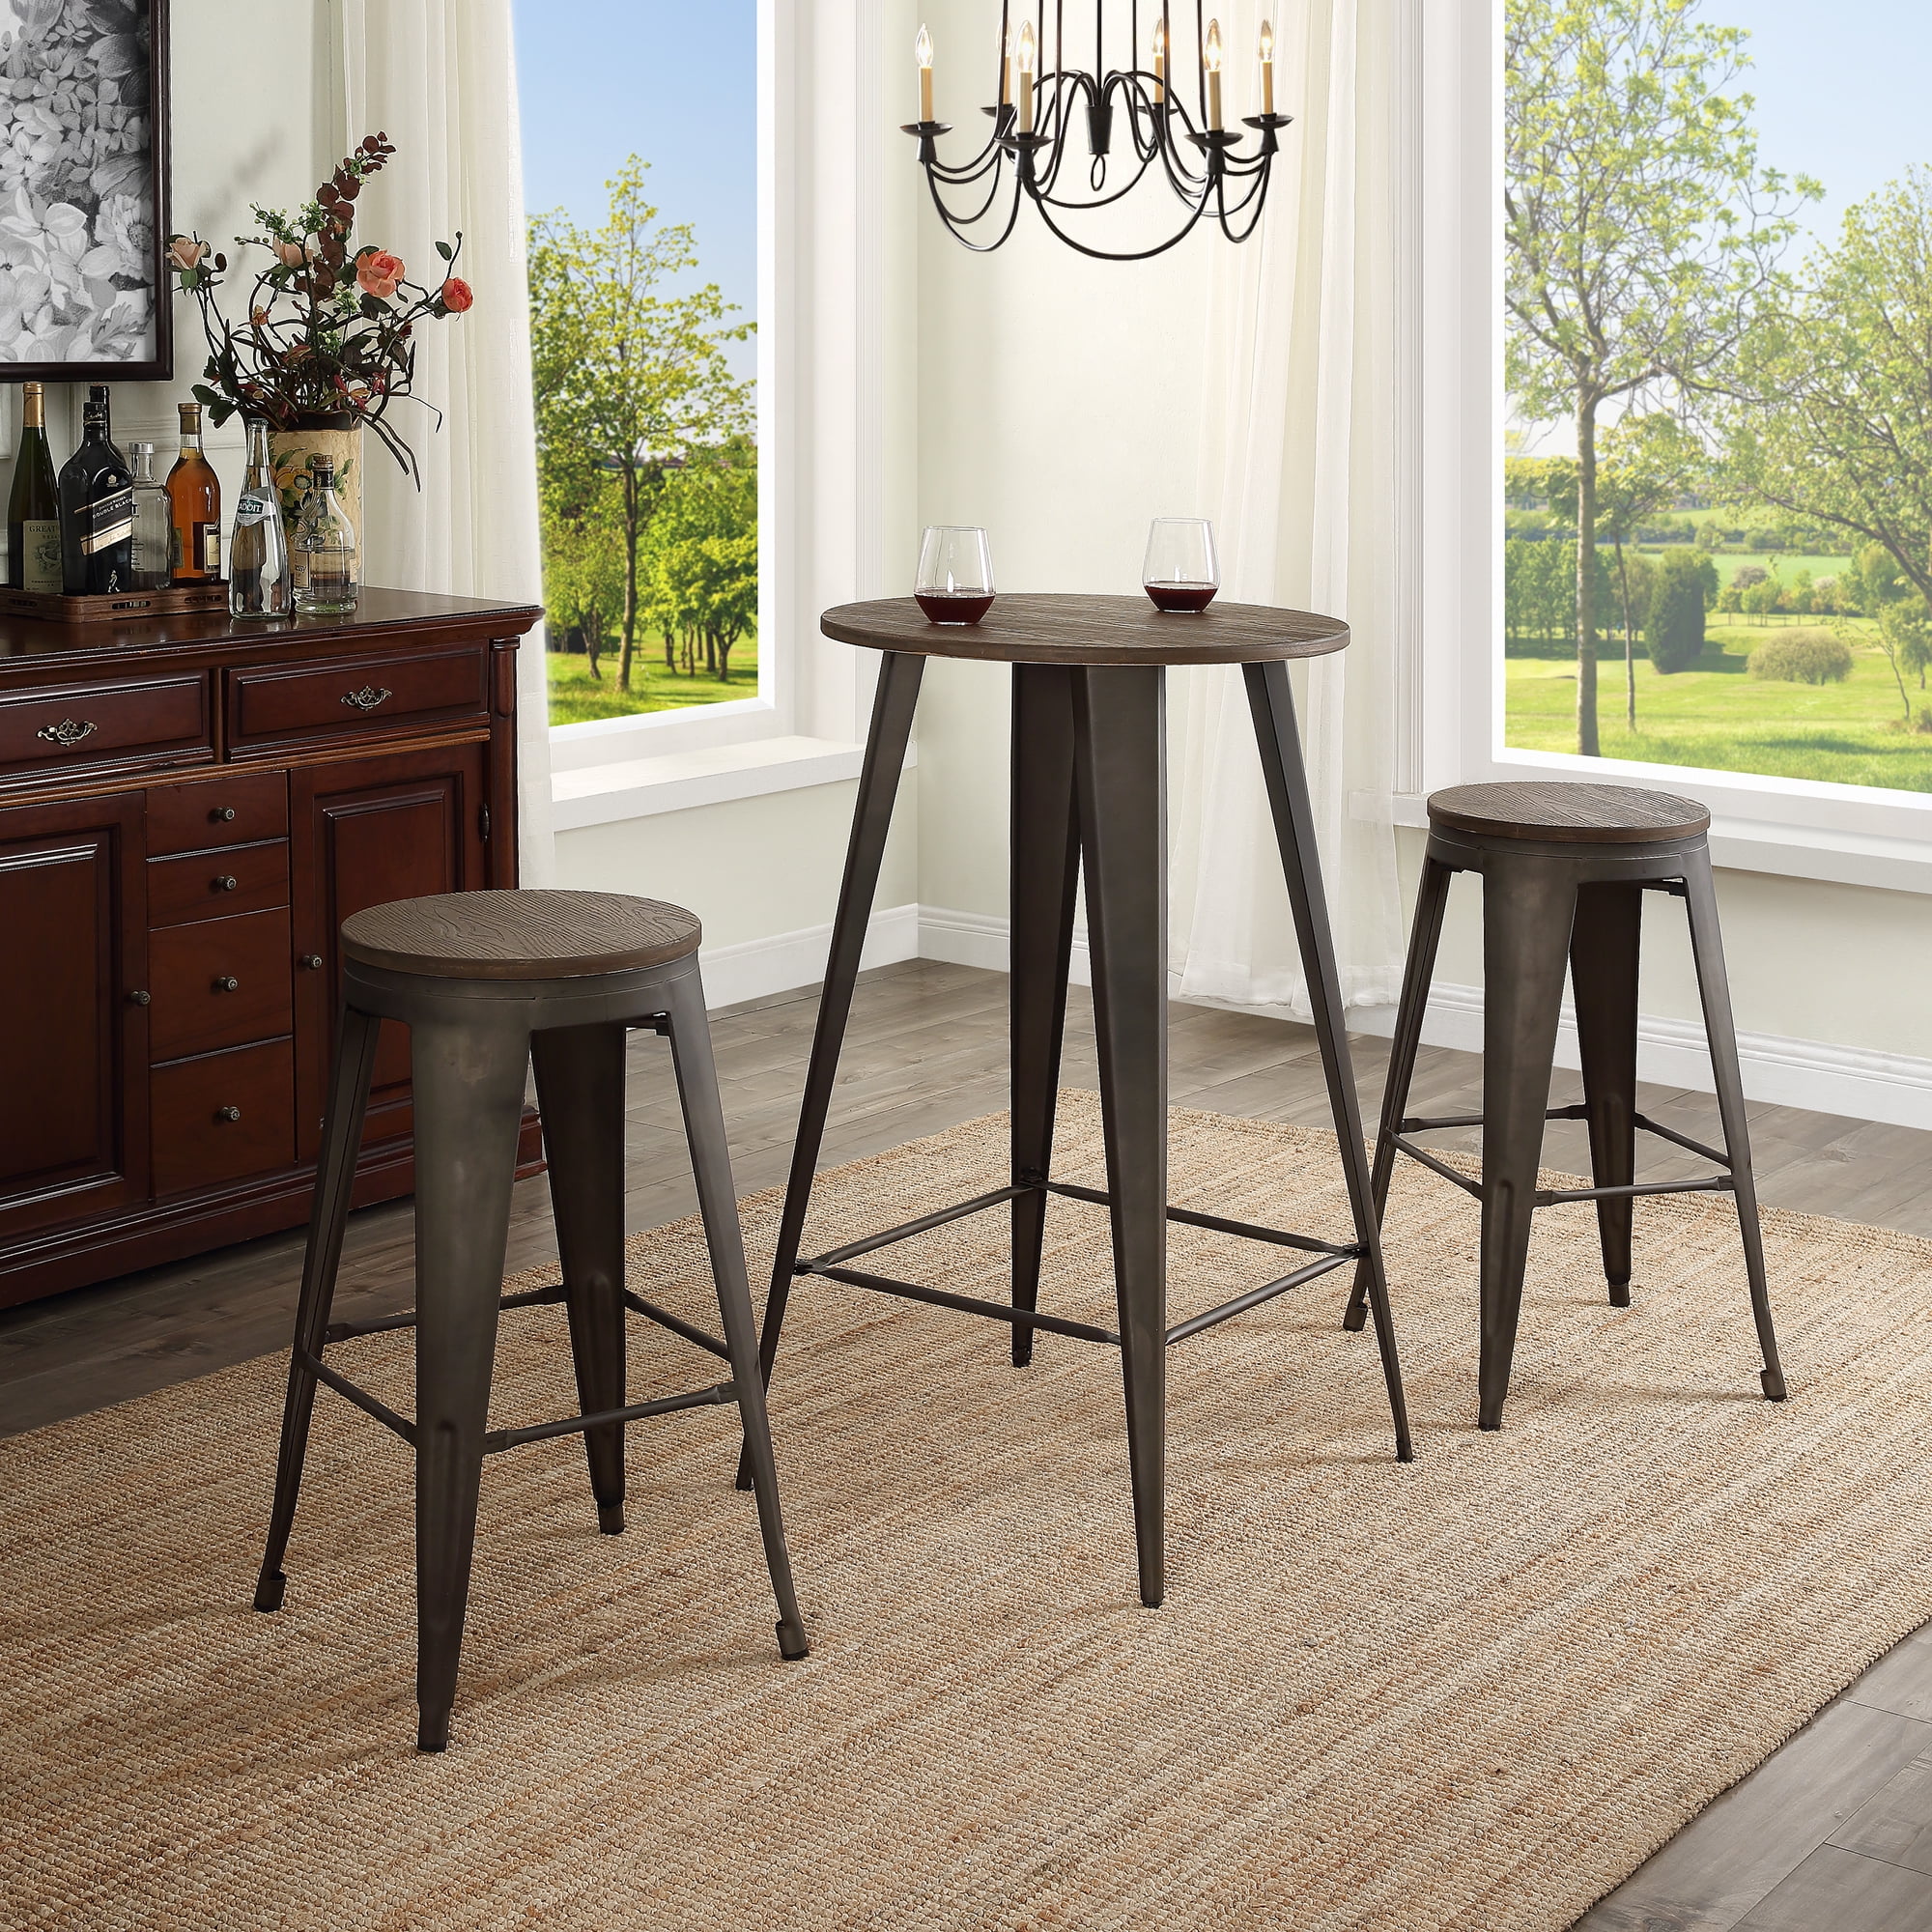 Dining Table Set With 2 Bar Stools, Small Round Pub Table And Chairs